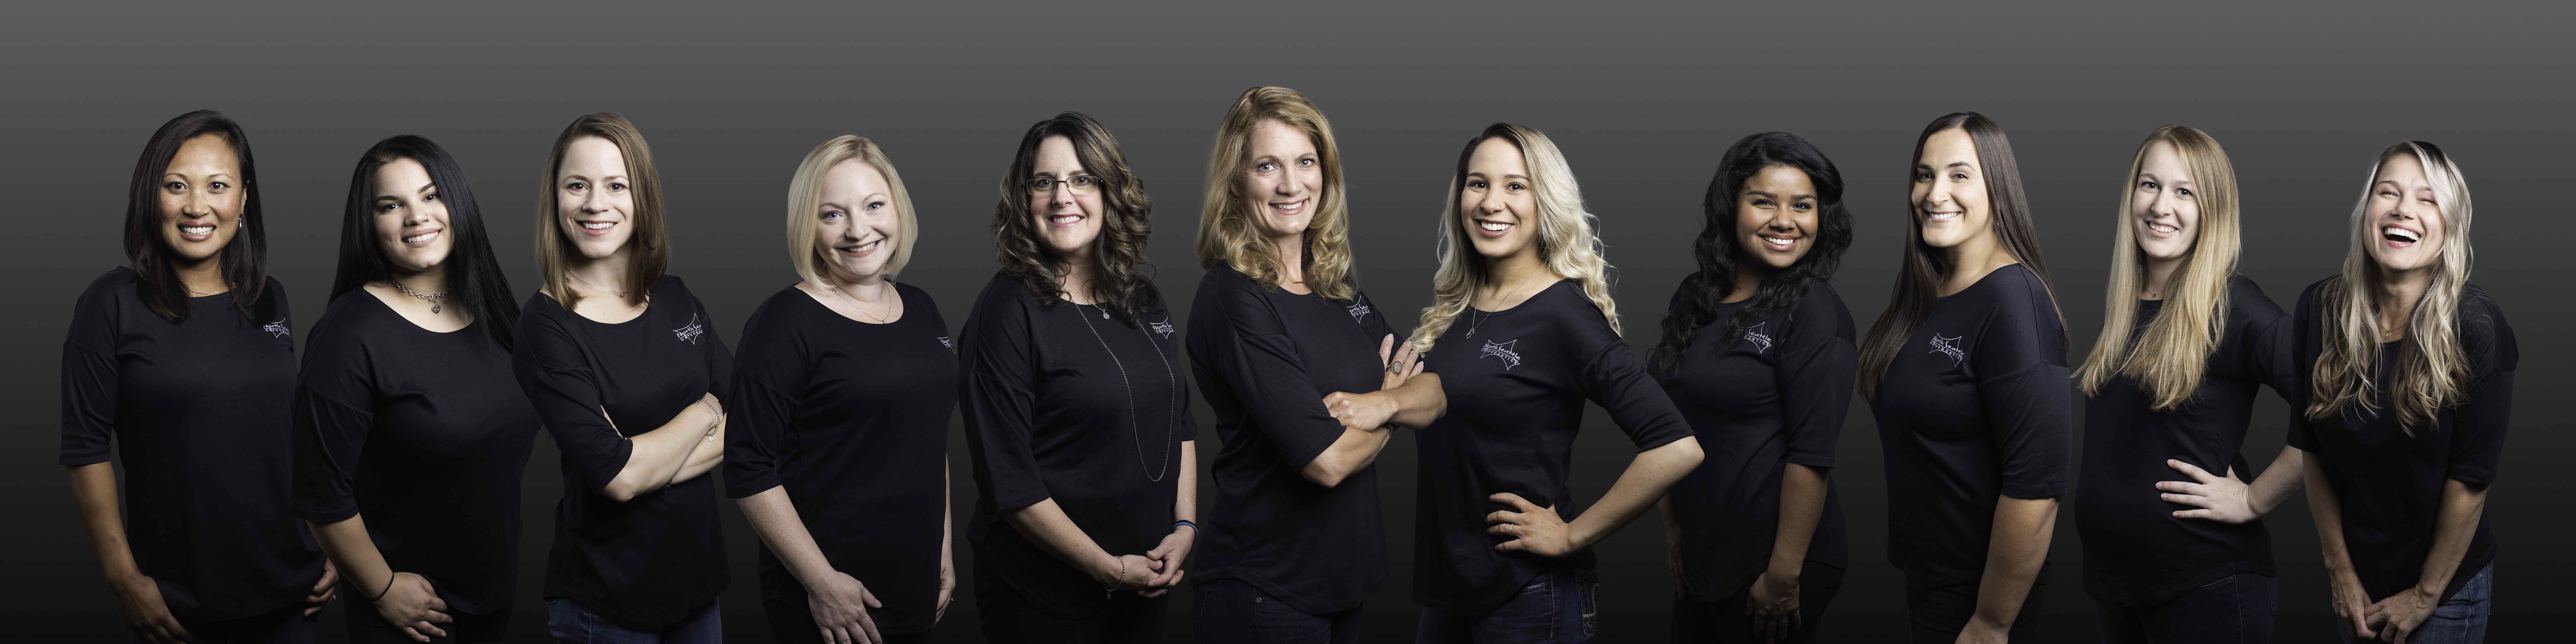 Group composite photo of 11 women posing for the camera in black shirts.